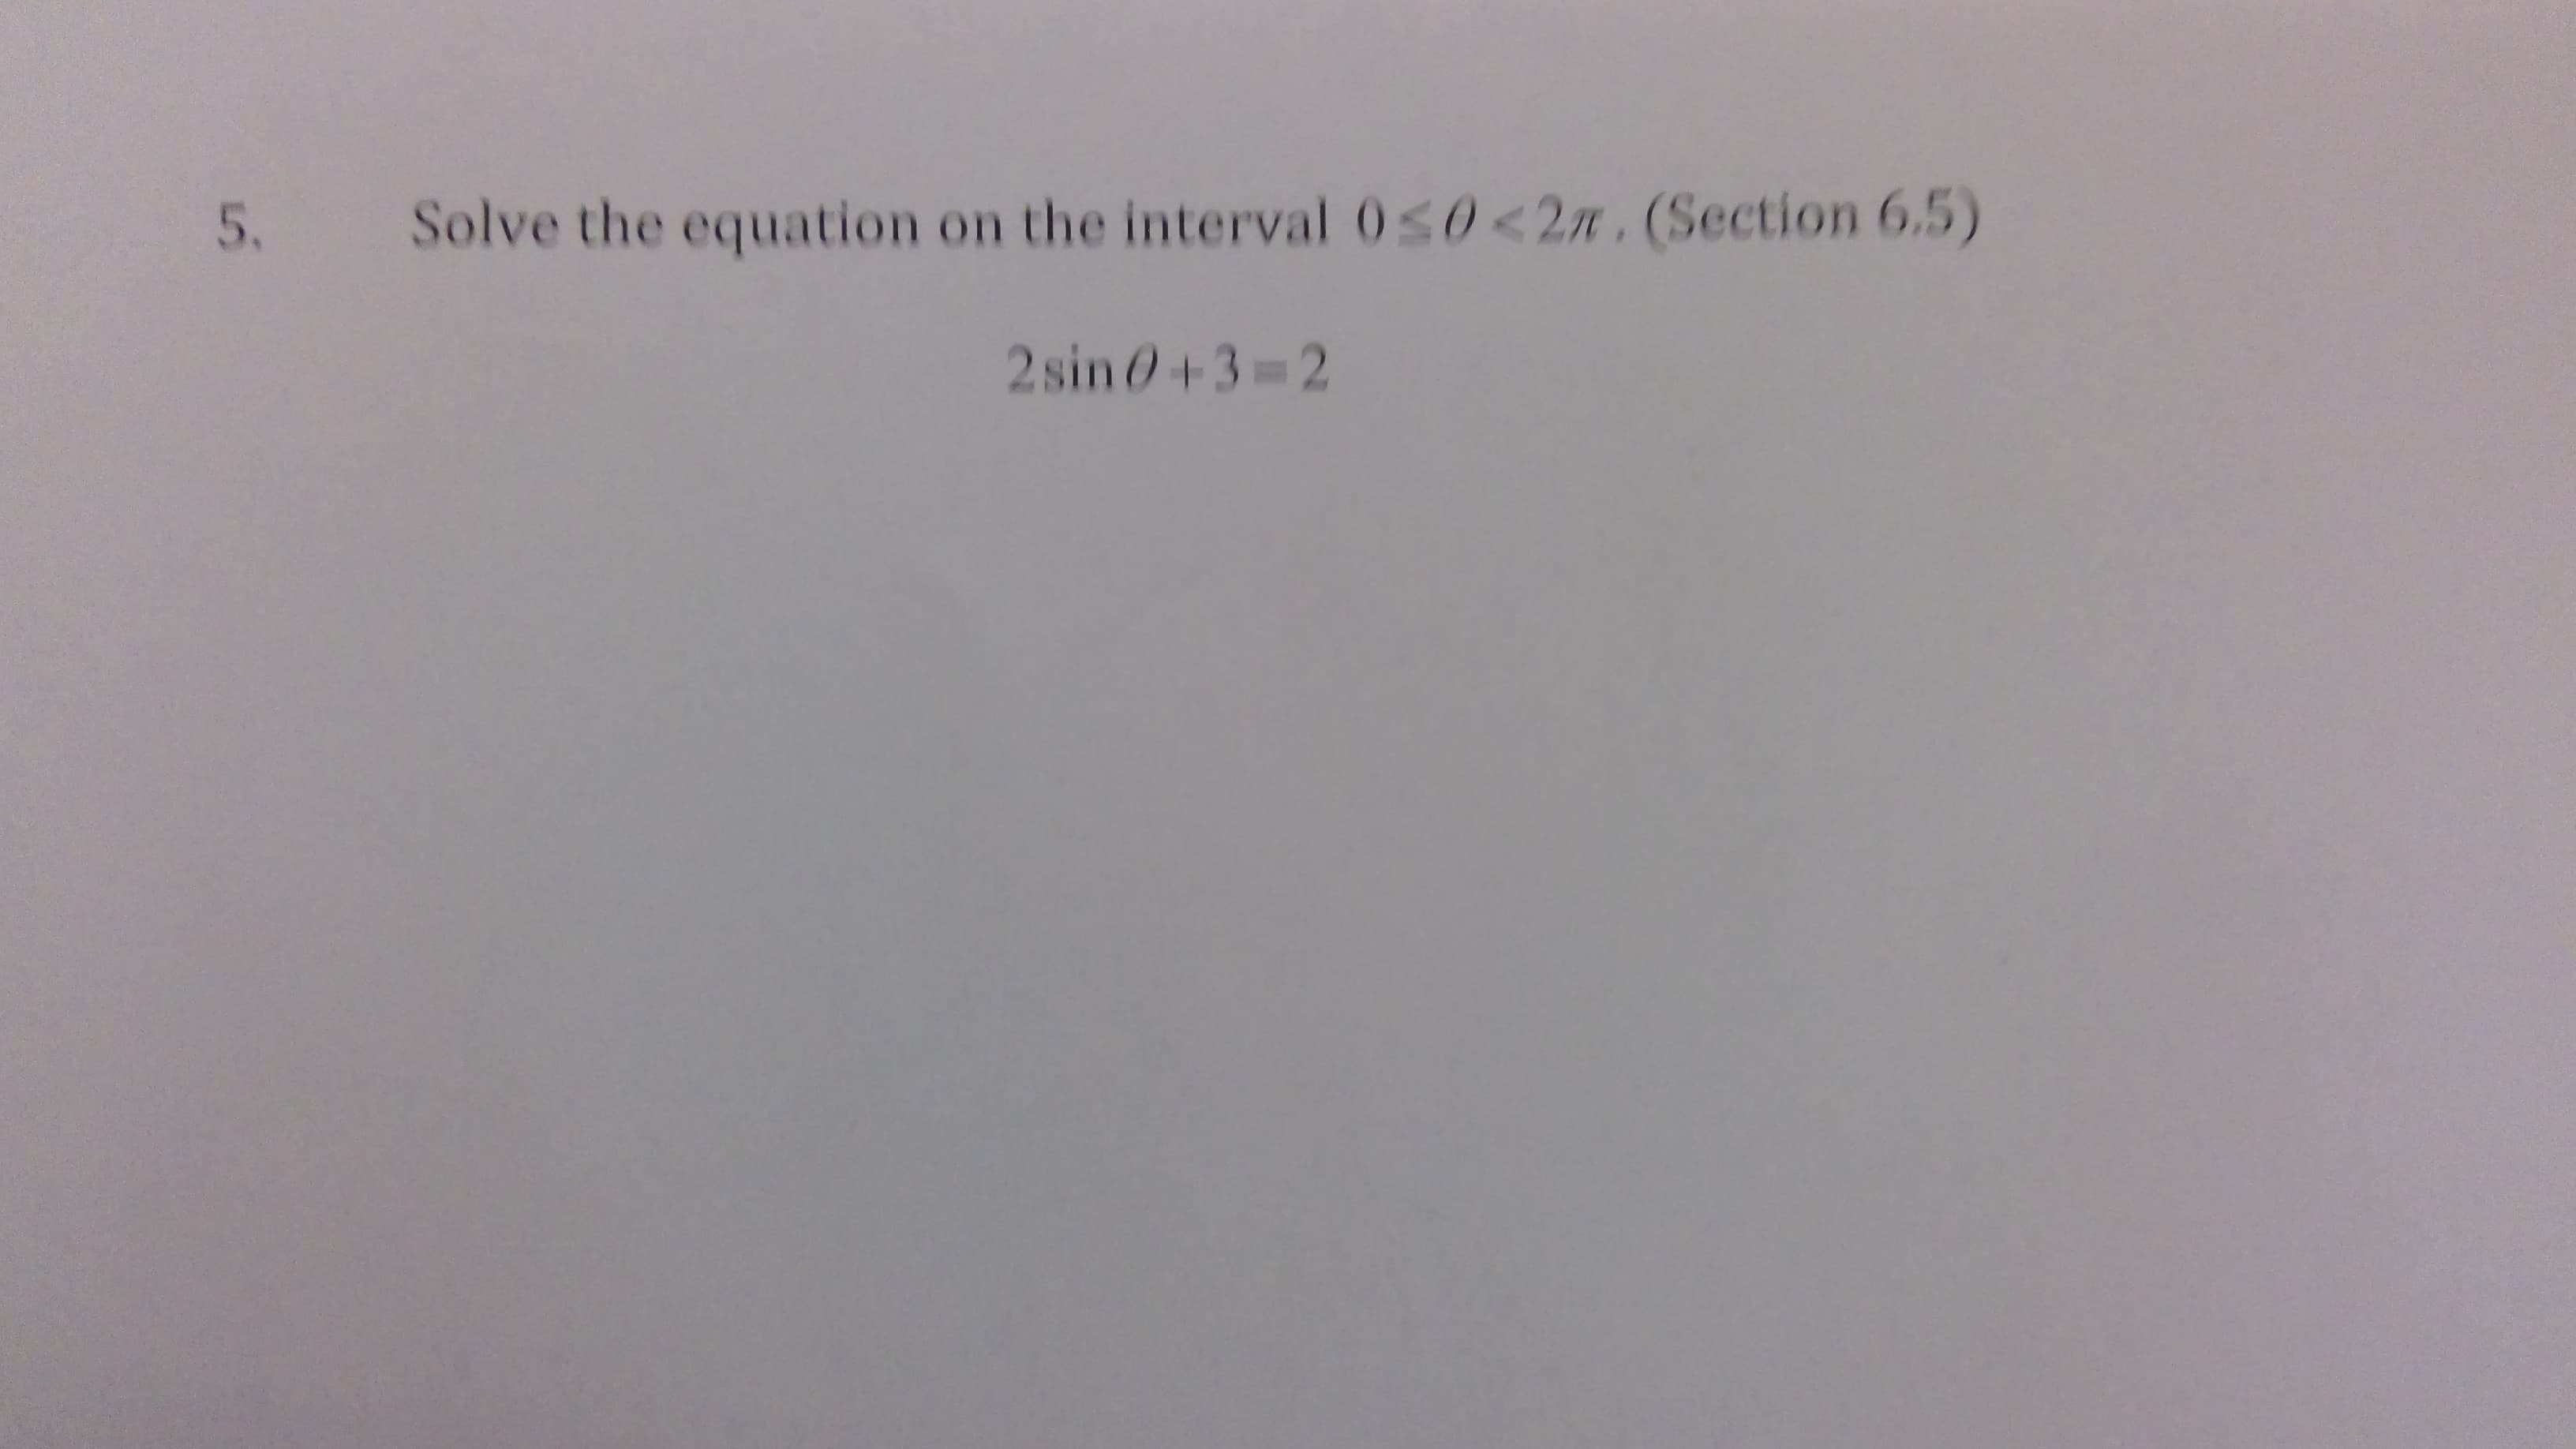 Solve the equation on the interval 0s0<2n, (Section 6.5)
2sin 0+3 2
5.
